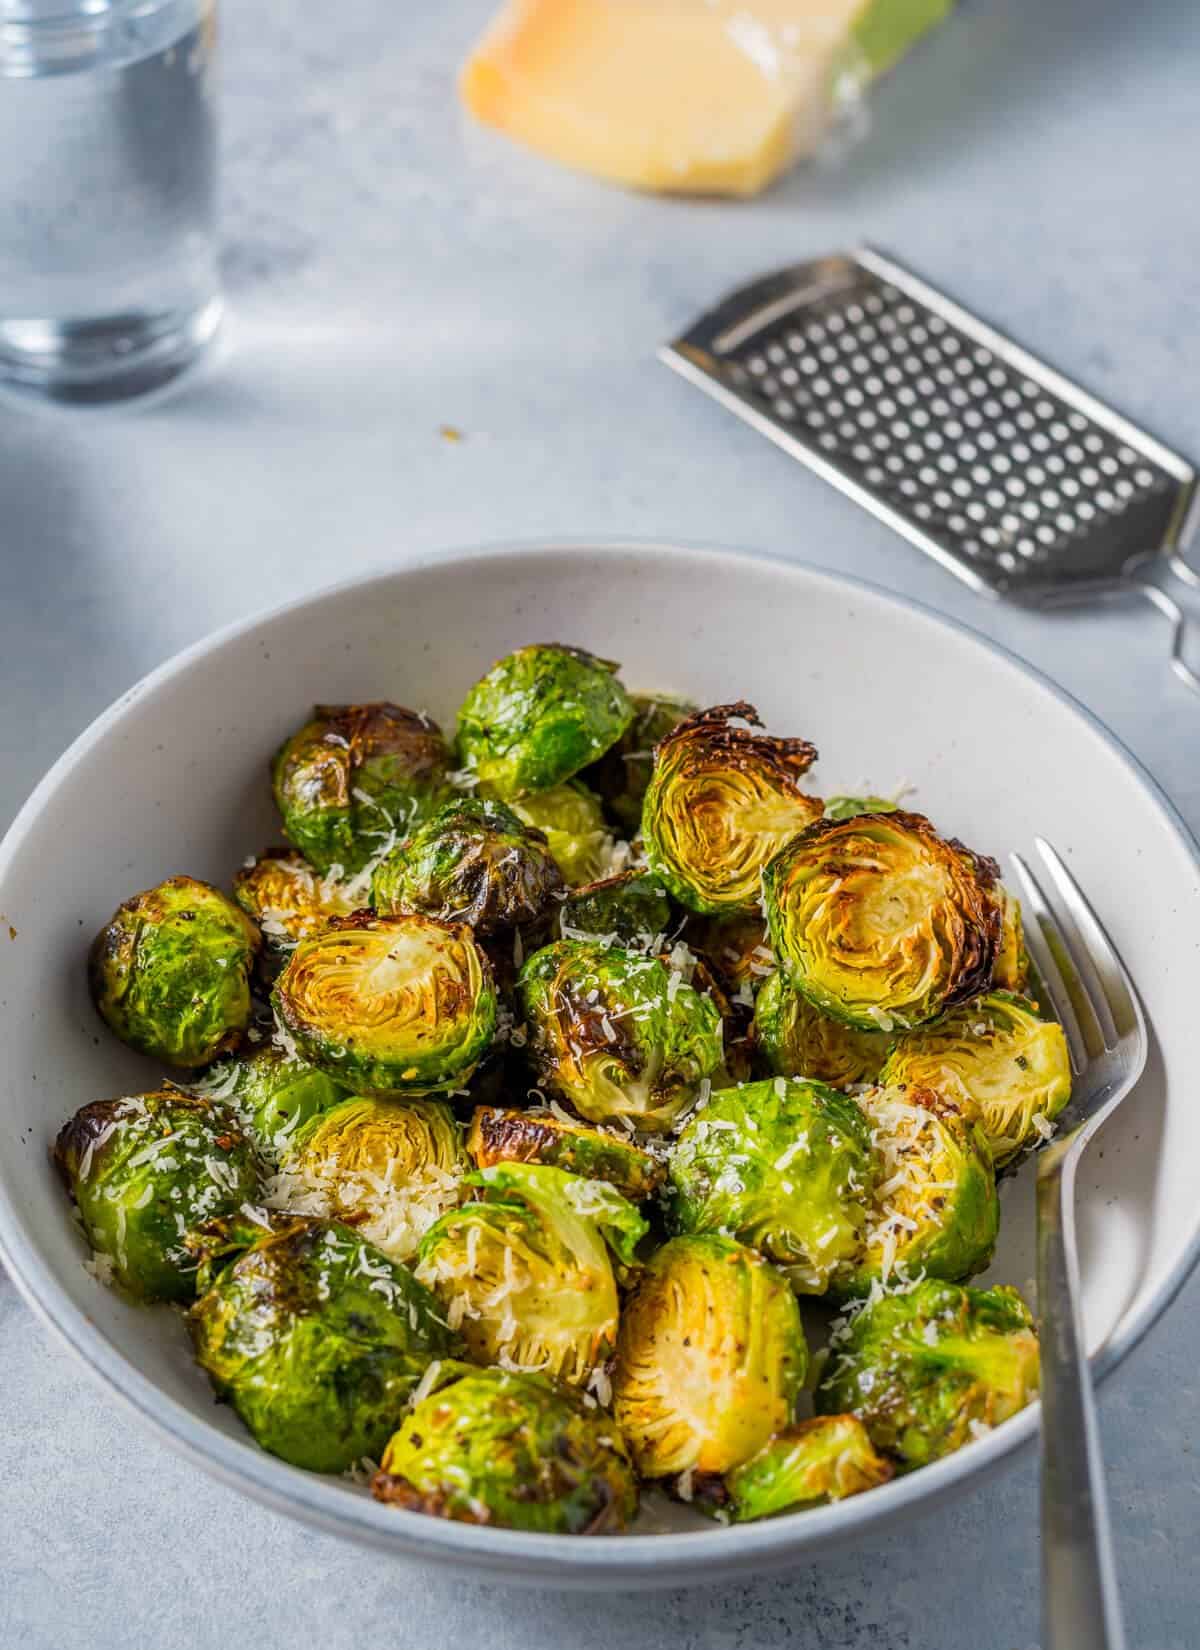 Crispy Air Fryer Brussels Sprouts garnished with freshly grated parmesan cheese in a white bowl with a metal fork